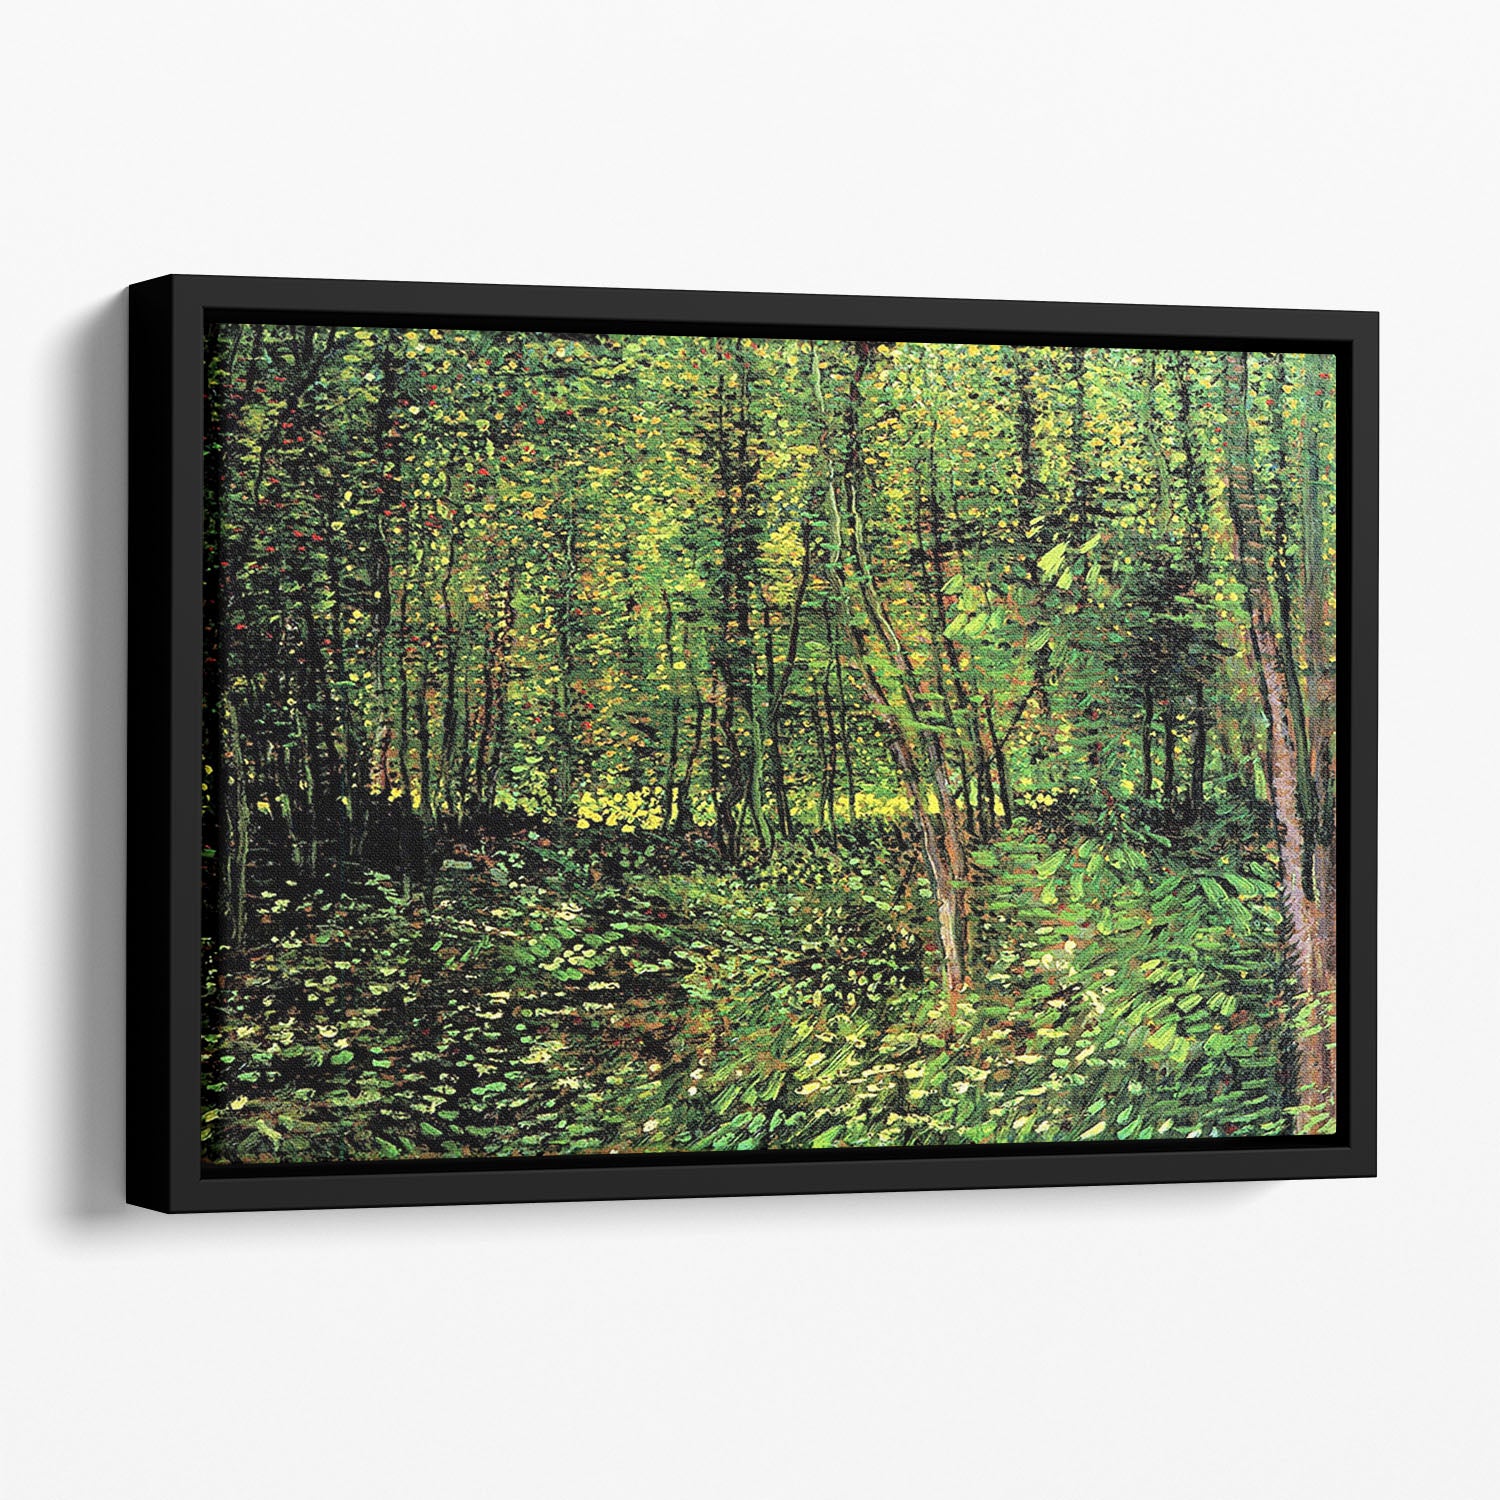 Trees and Undergrowth 2 by Van Gogh Floating Framed Canvas